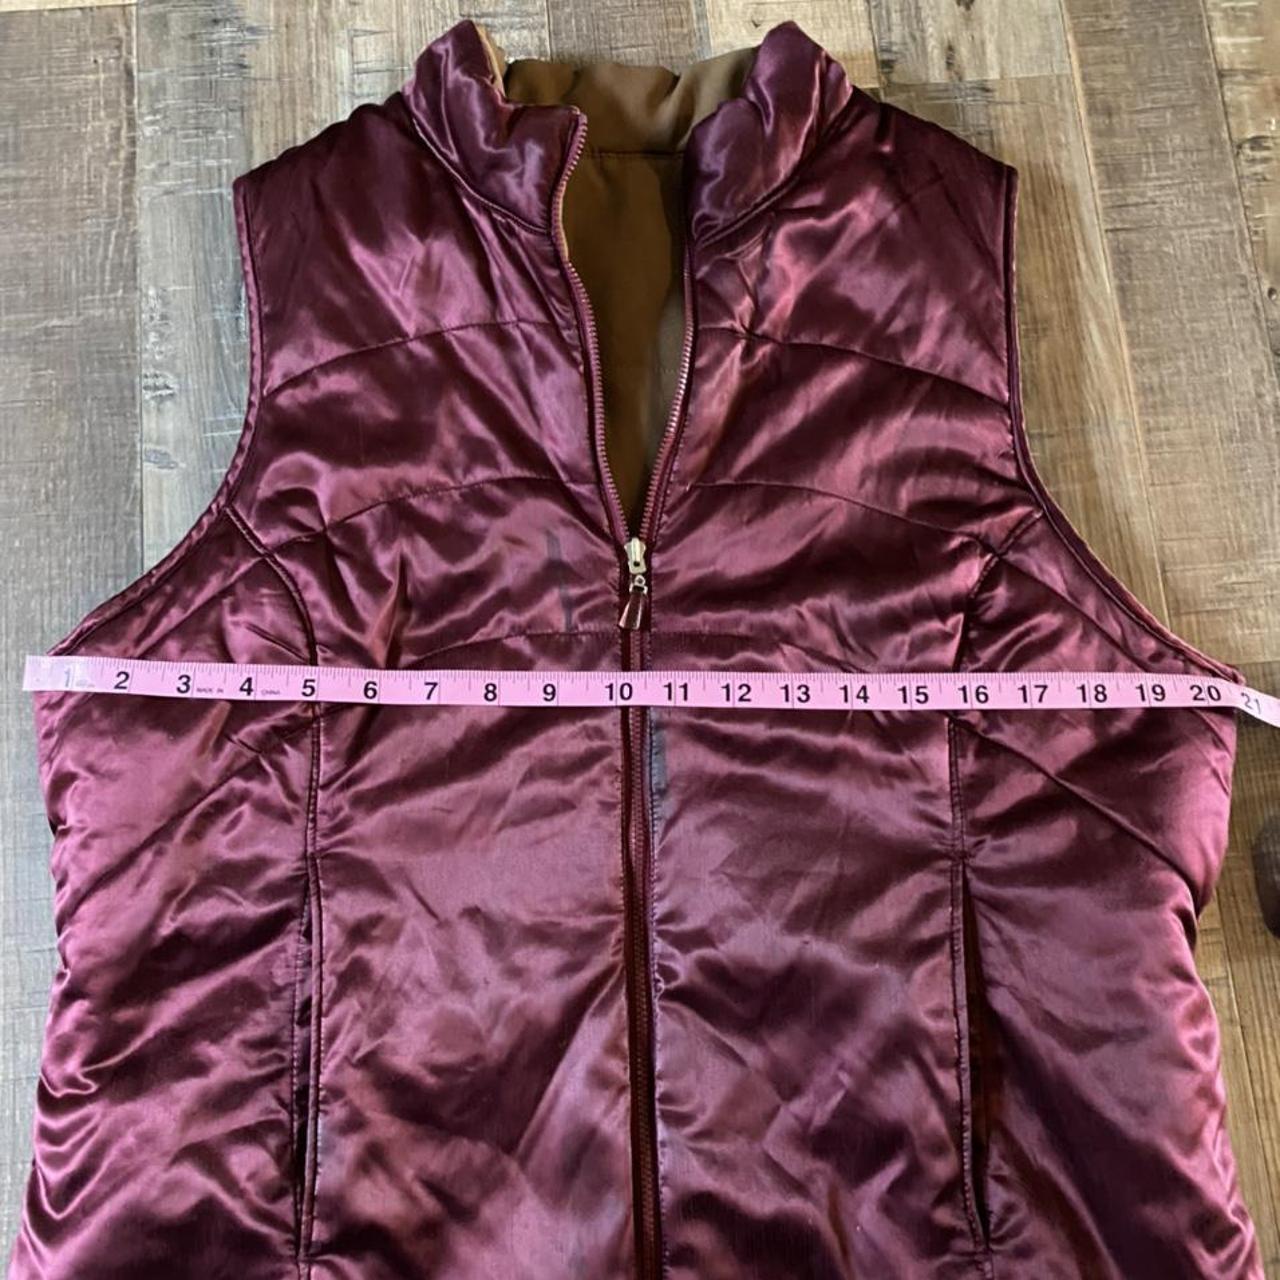 Product Image 2 - Burgundy puffer vest!❄️ 
Pit to